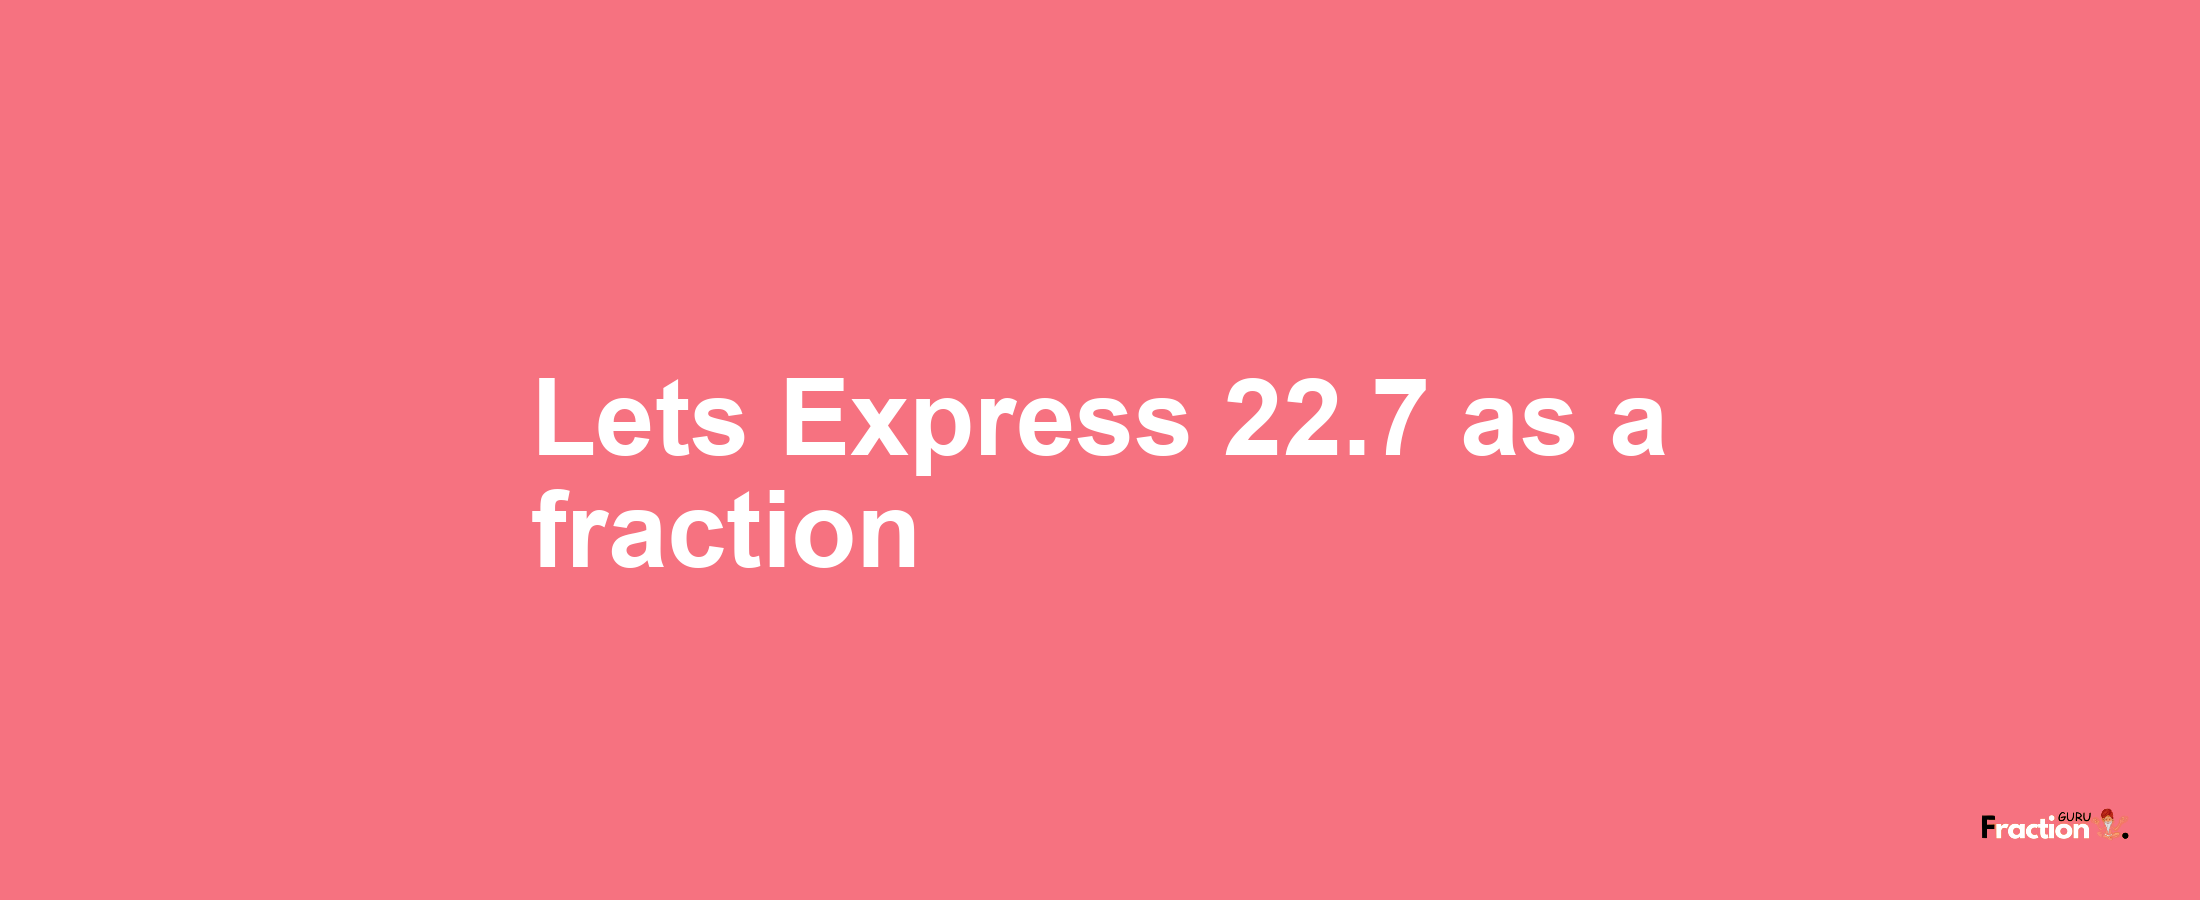 Lets Express 22.7 as afraction